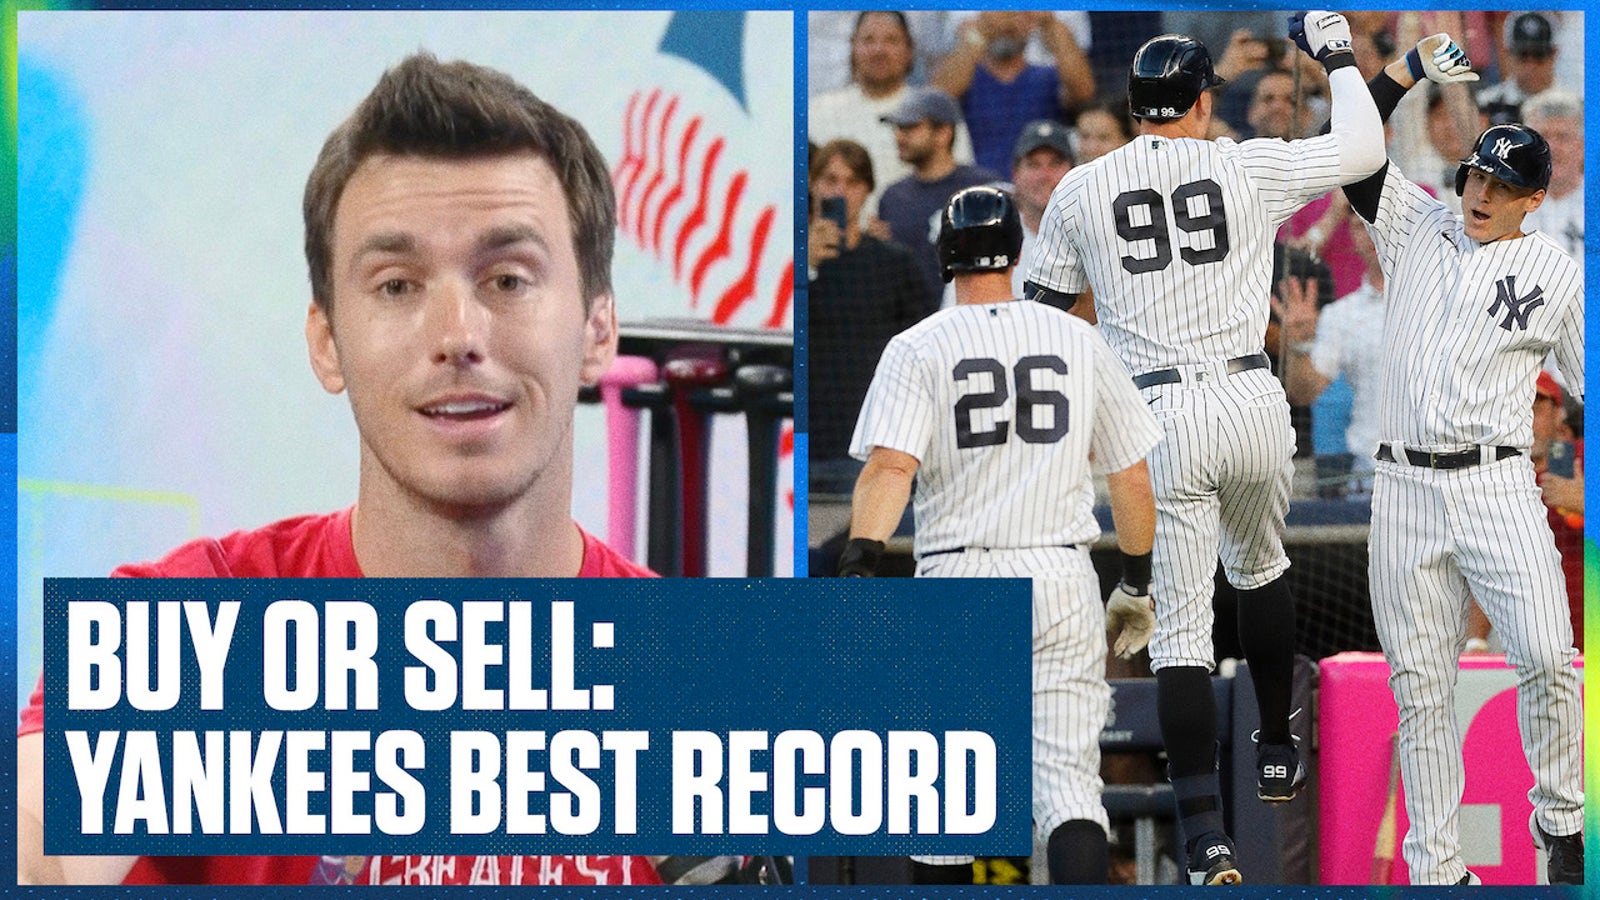 Will the Yankees finish with the best record?